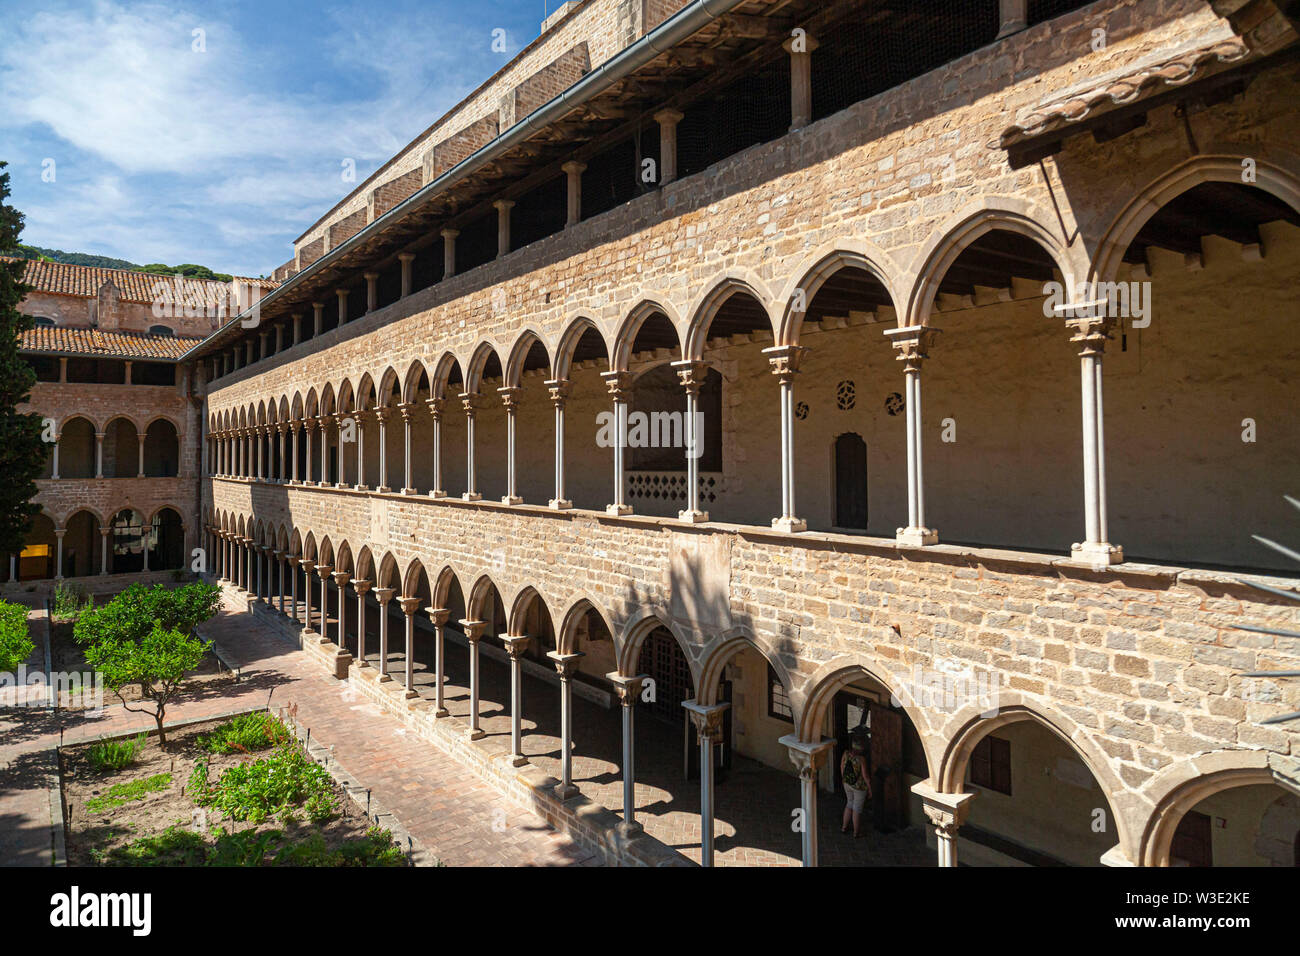 Barcelona, Spain. Cloister of Monastery of Pedralbes. Stock Photo